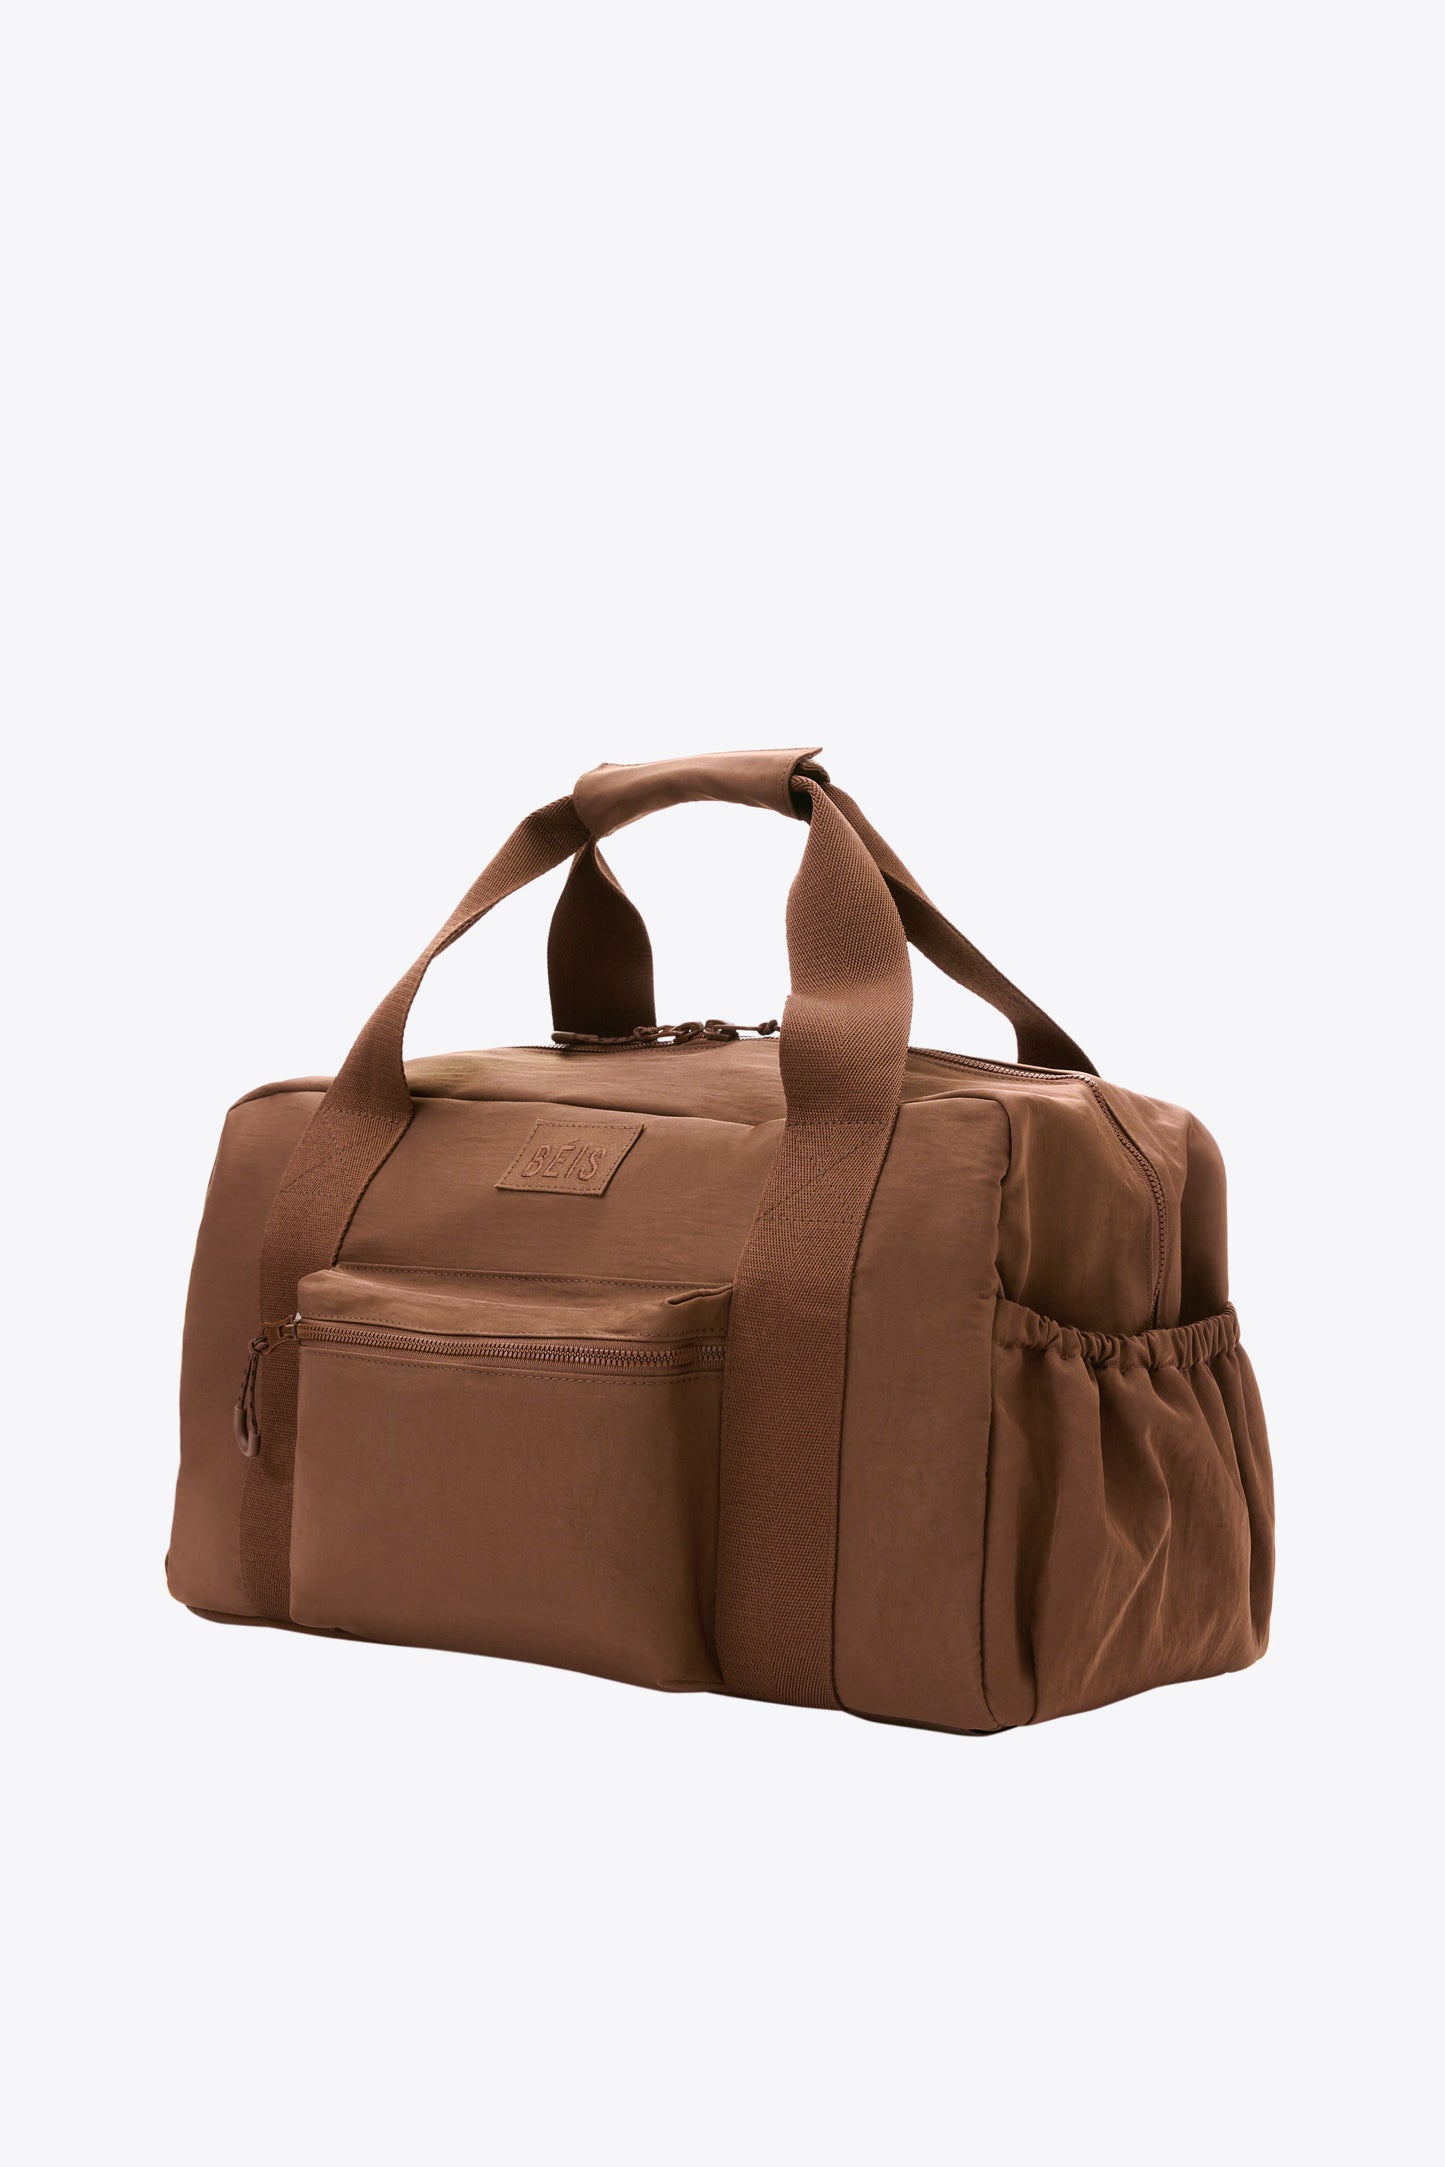 The Sport Duffle in Maple